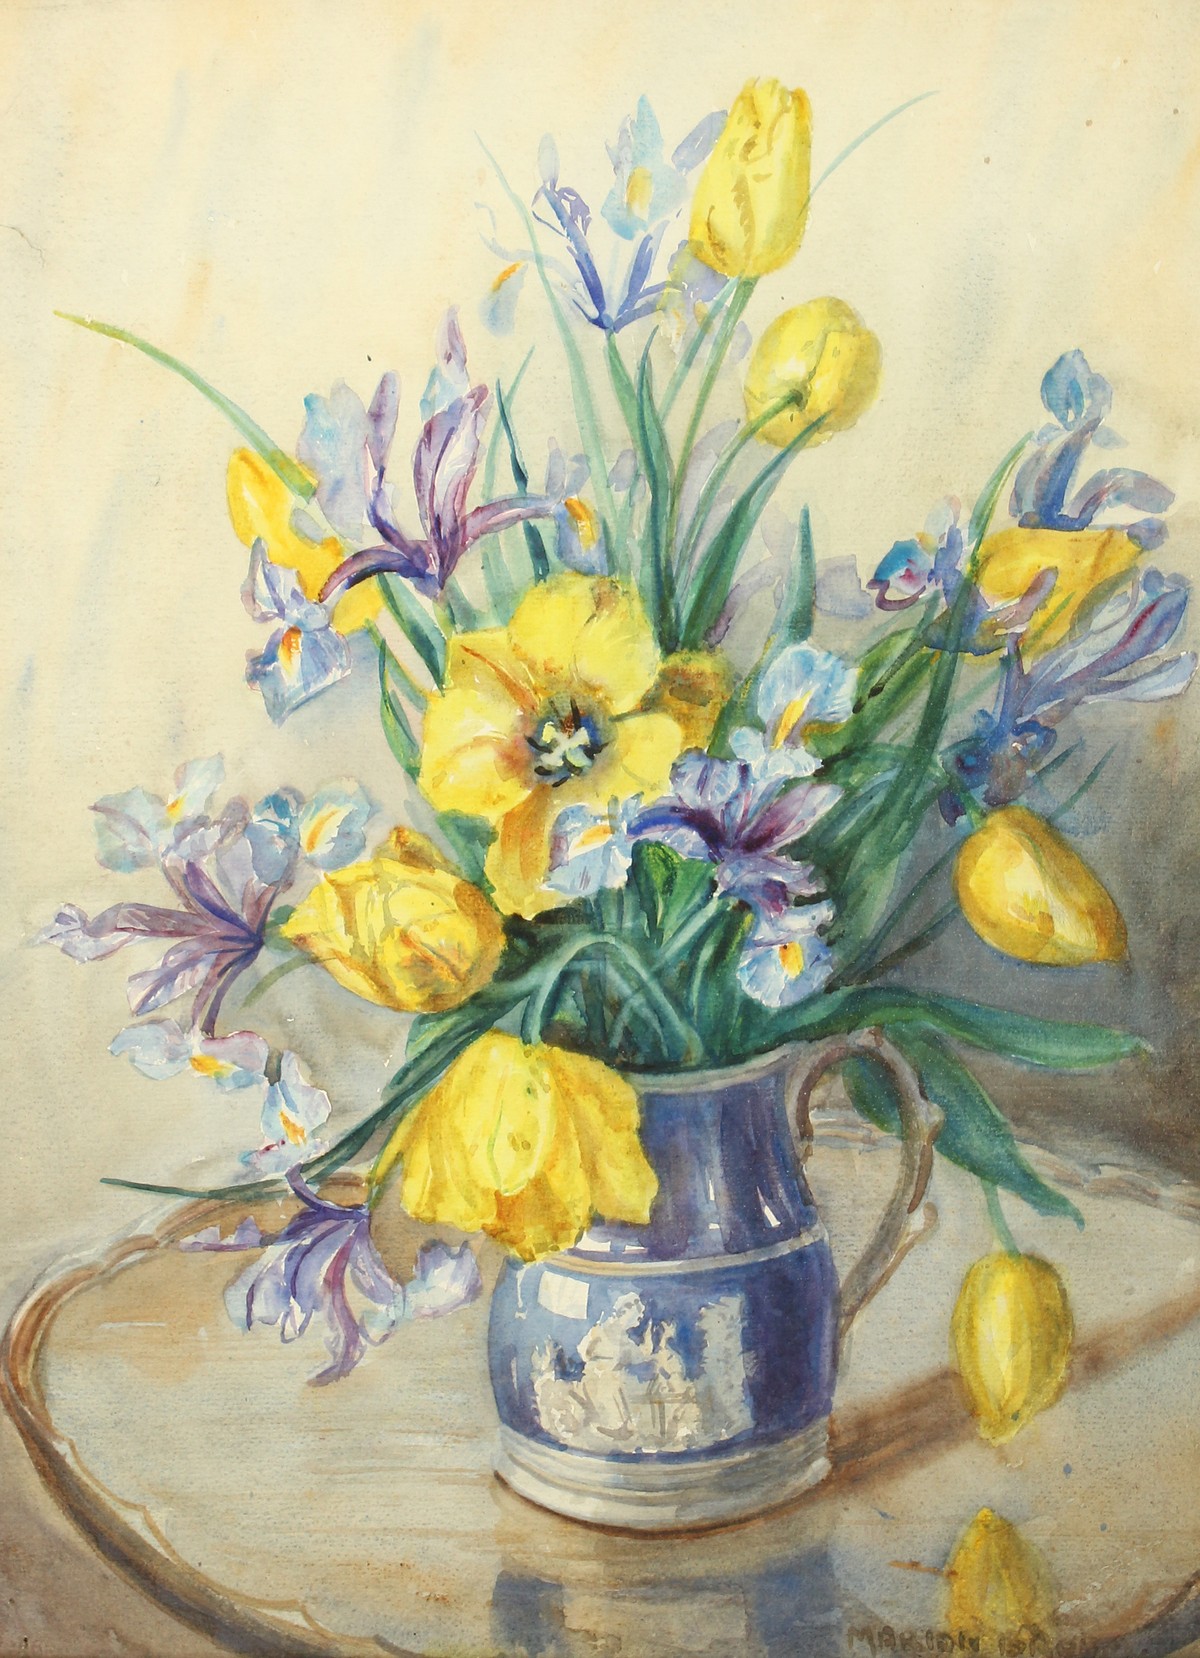 Marion Broom (1878-1962) British, A still life of mixed flowers in a classical style blue jug,